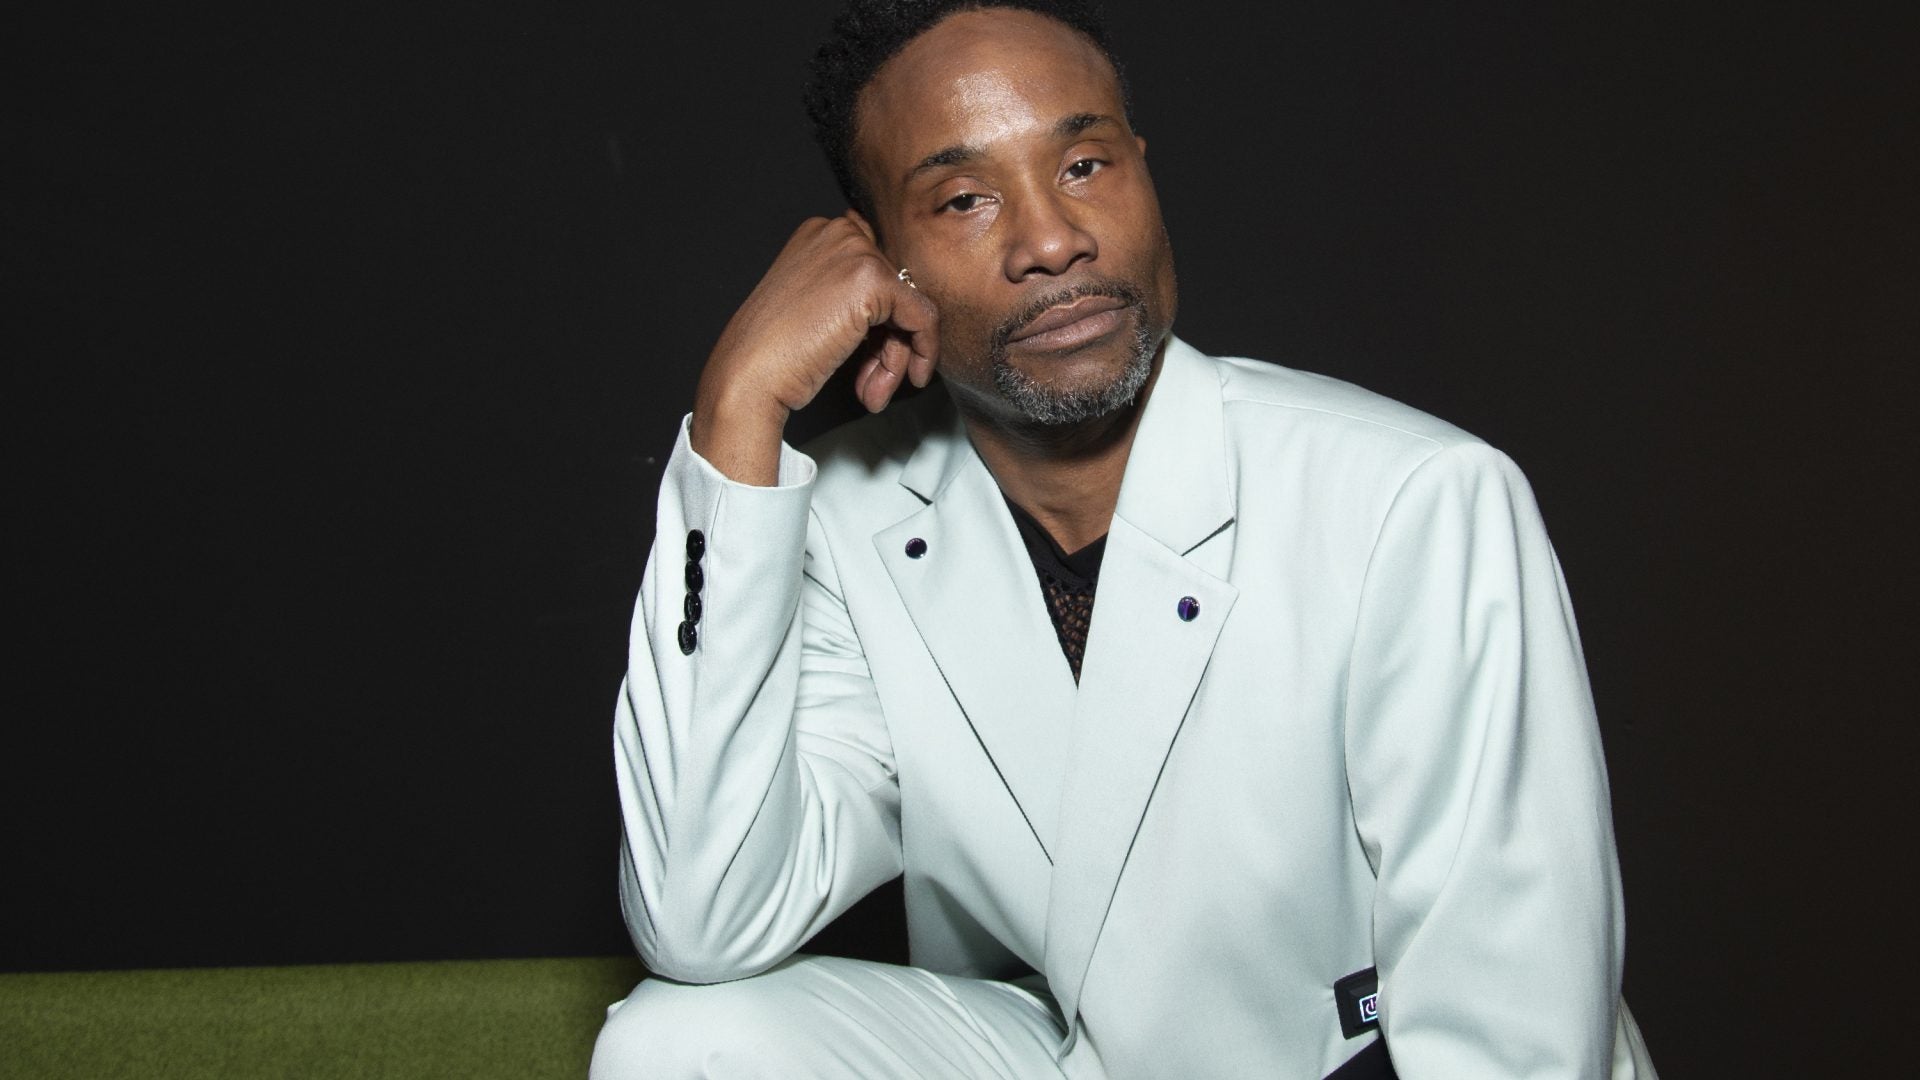 'The Truth Is Healing': Billy Porter Reveals He Was Diagnosed With HIV 14 Years Ago